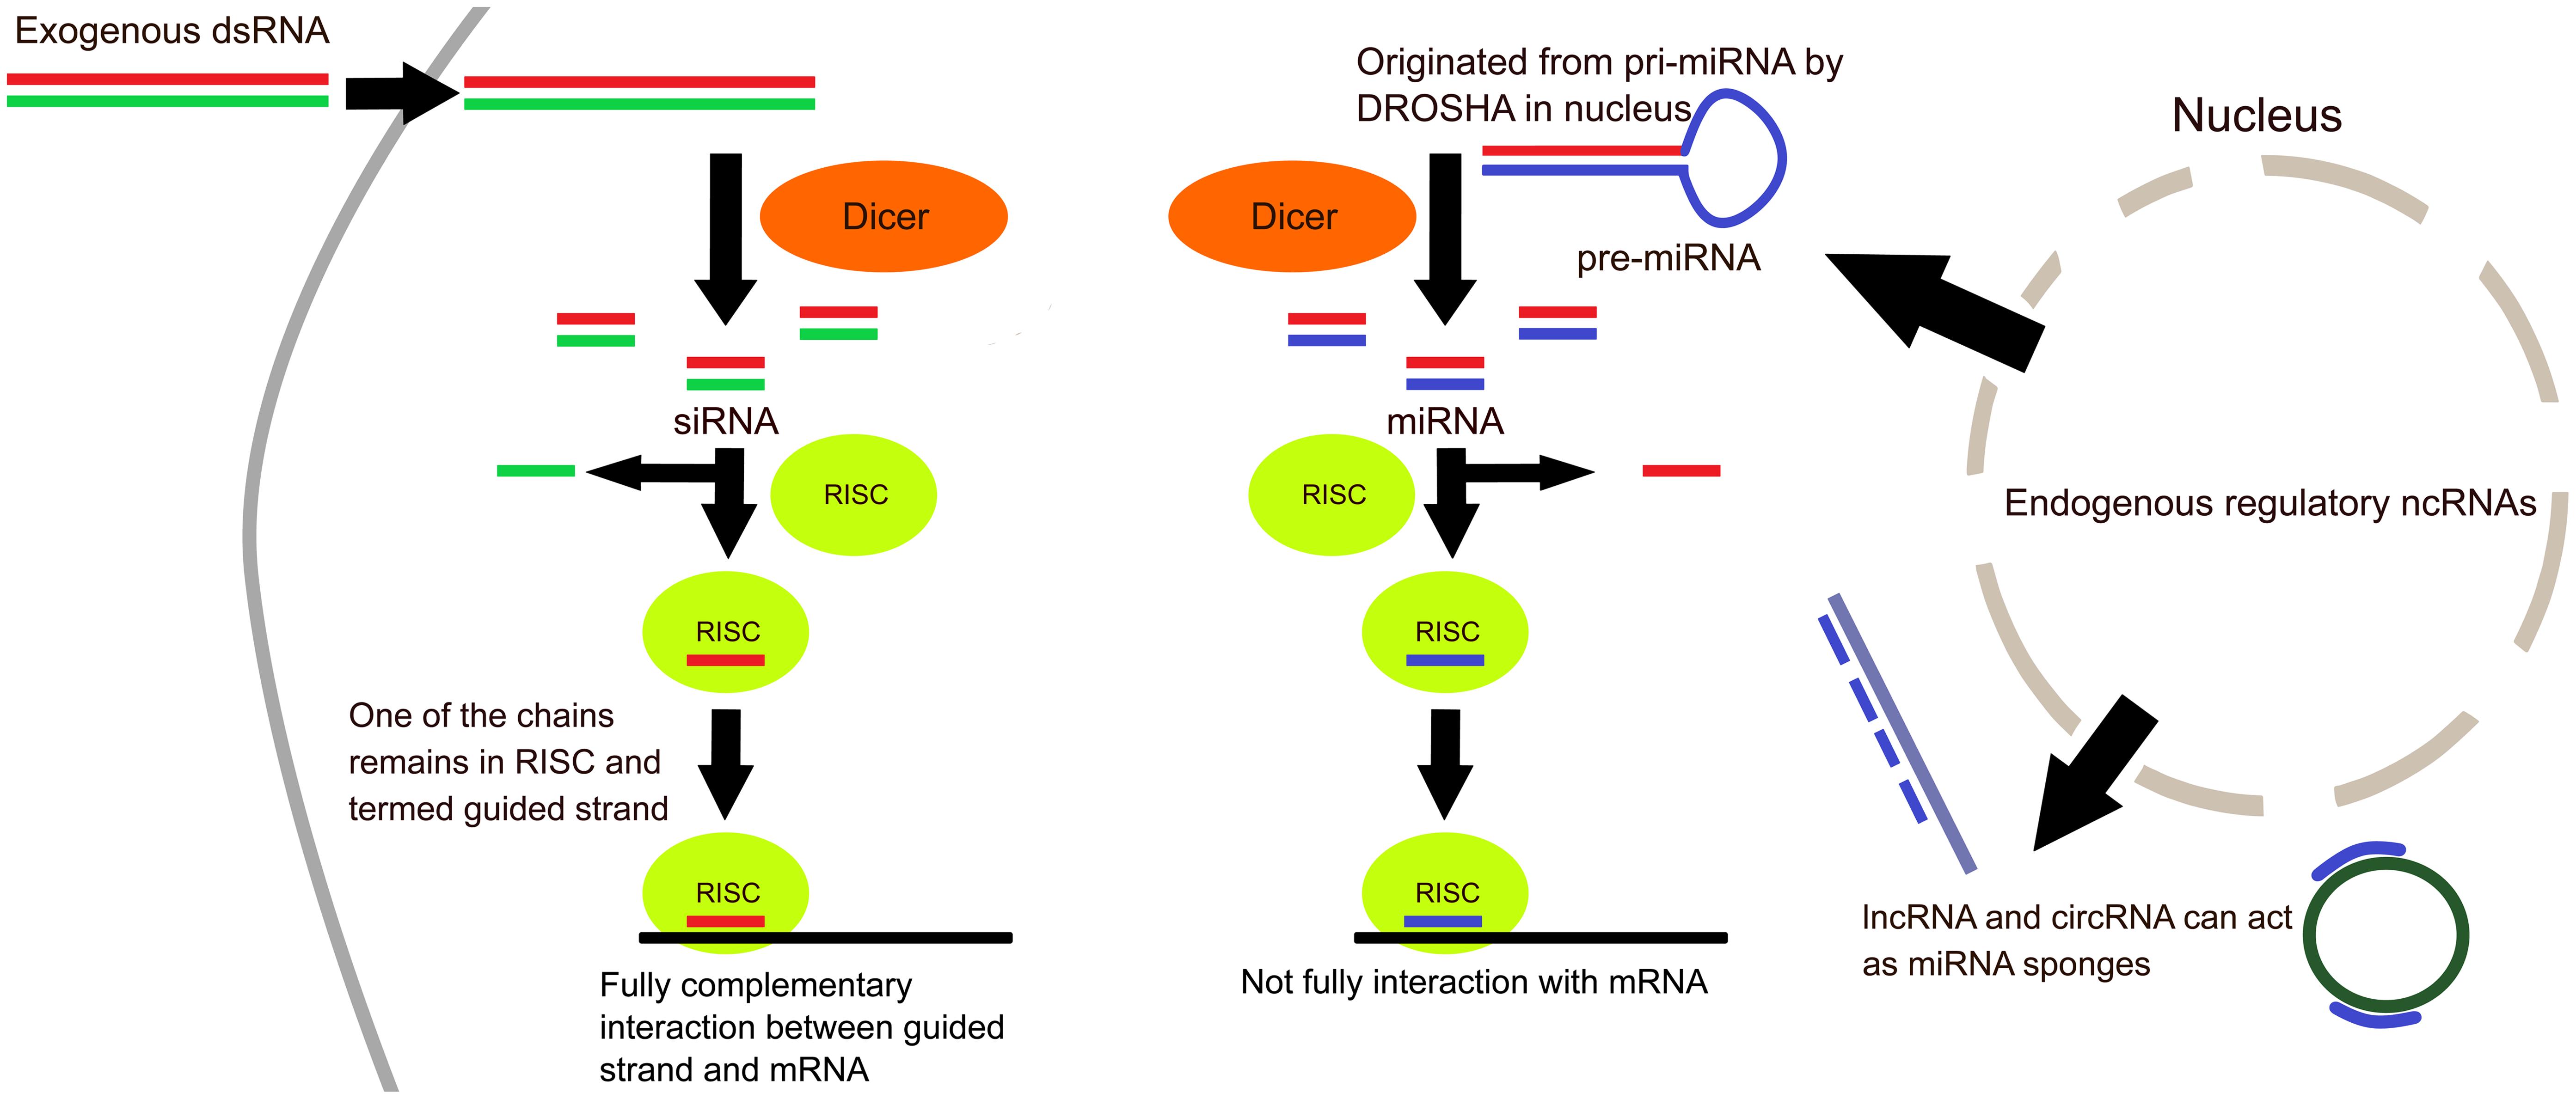 Types of ncRNAs and their places of action.